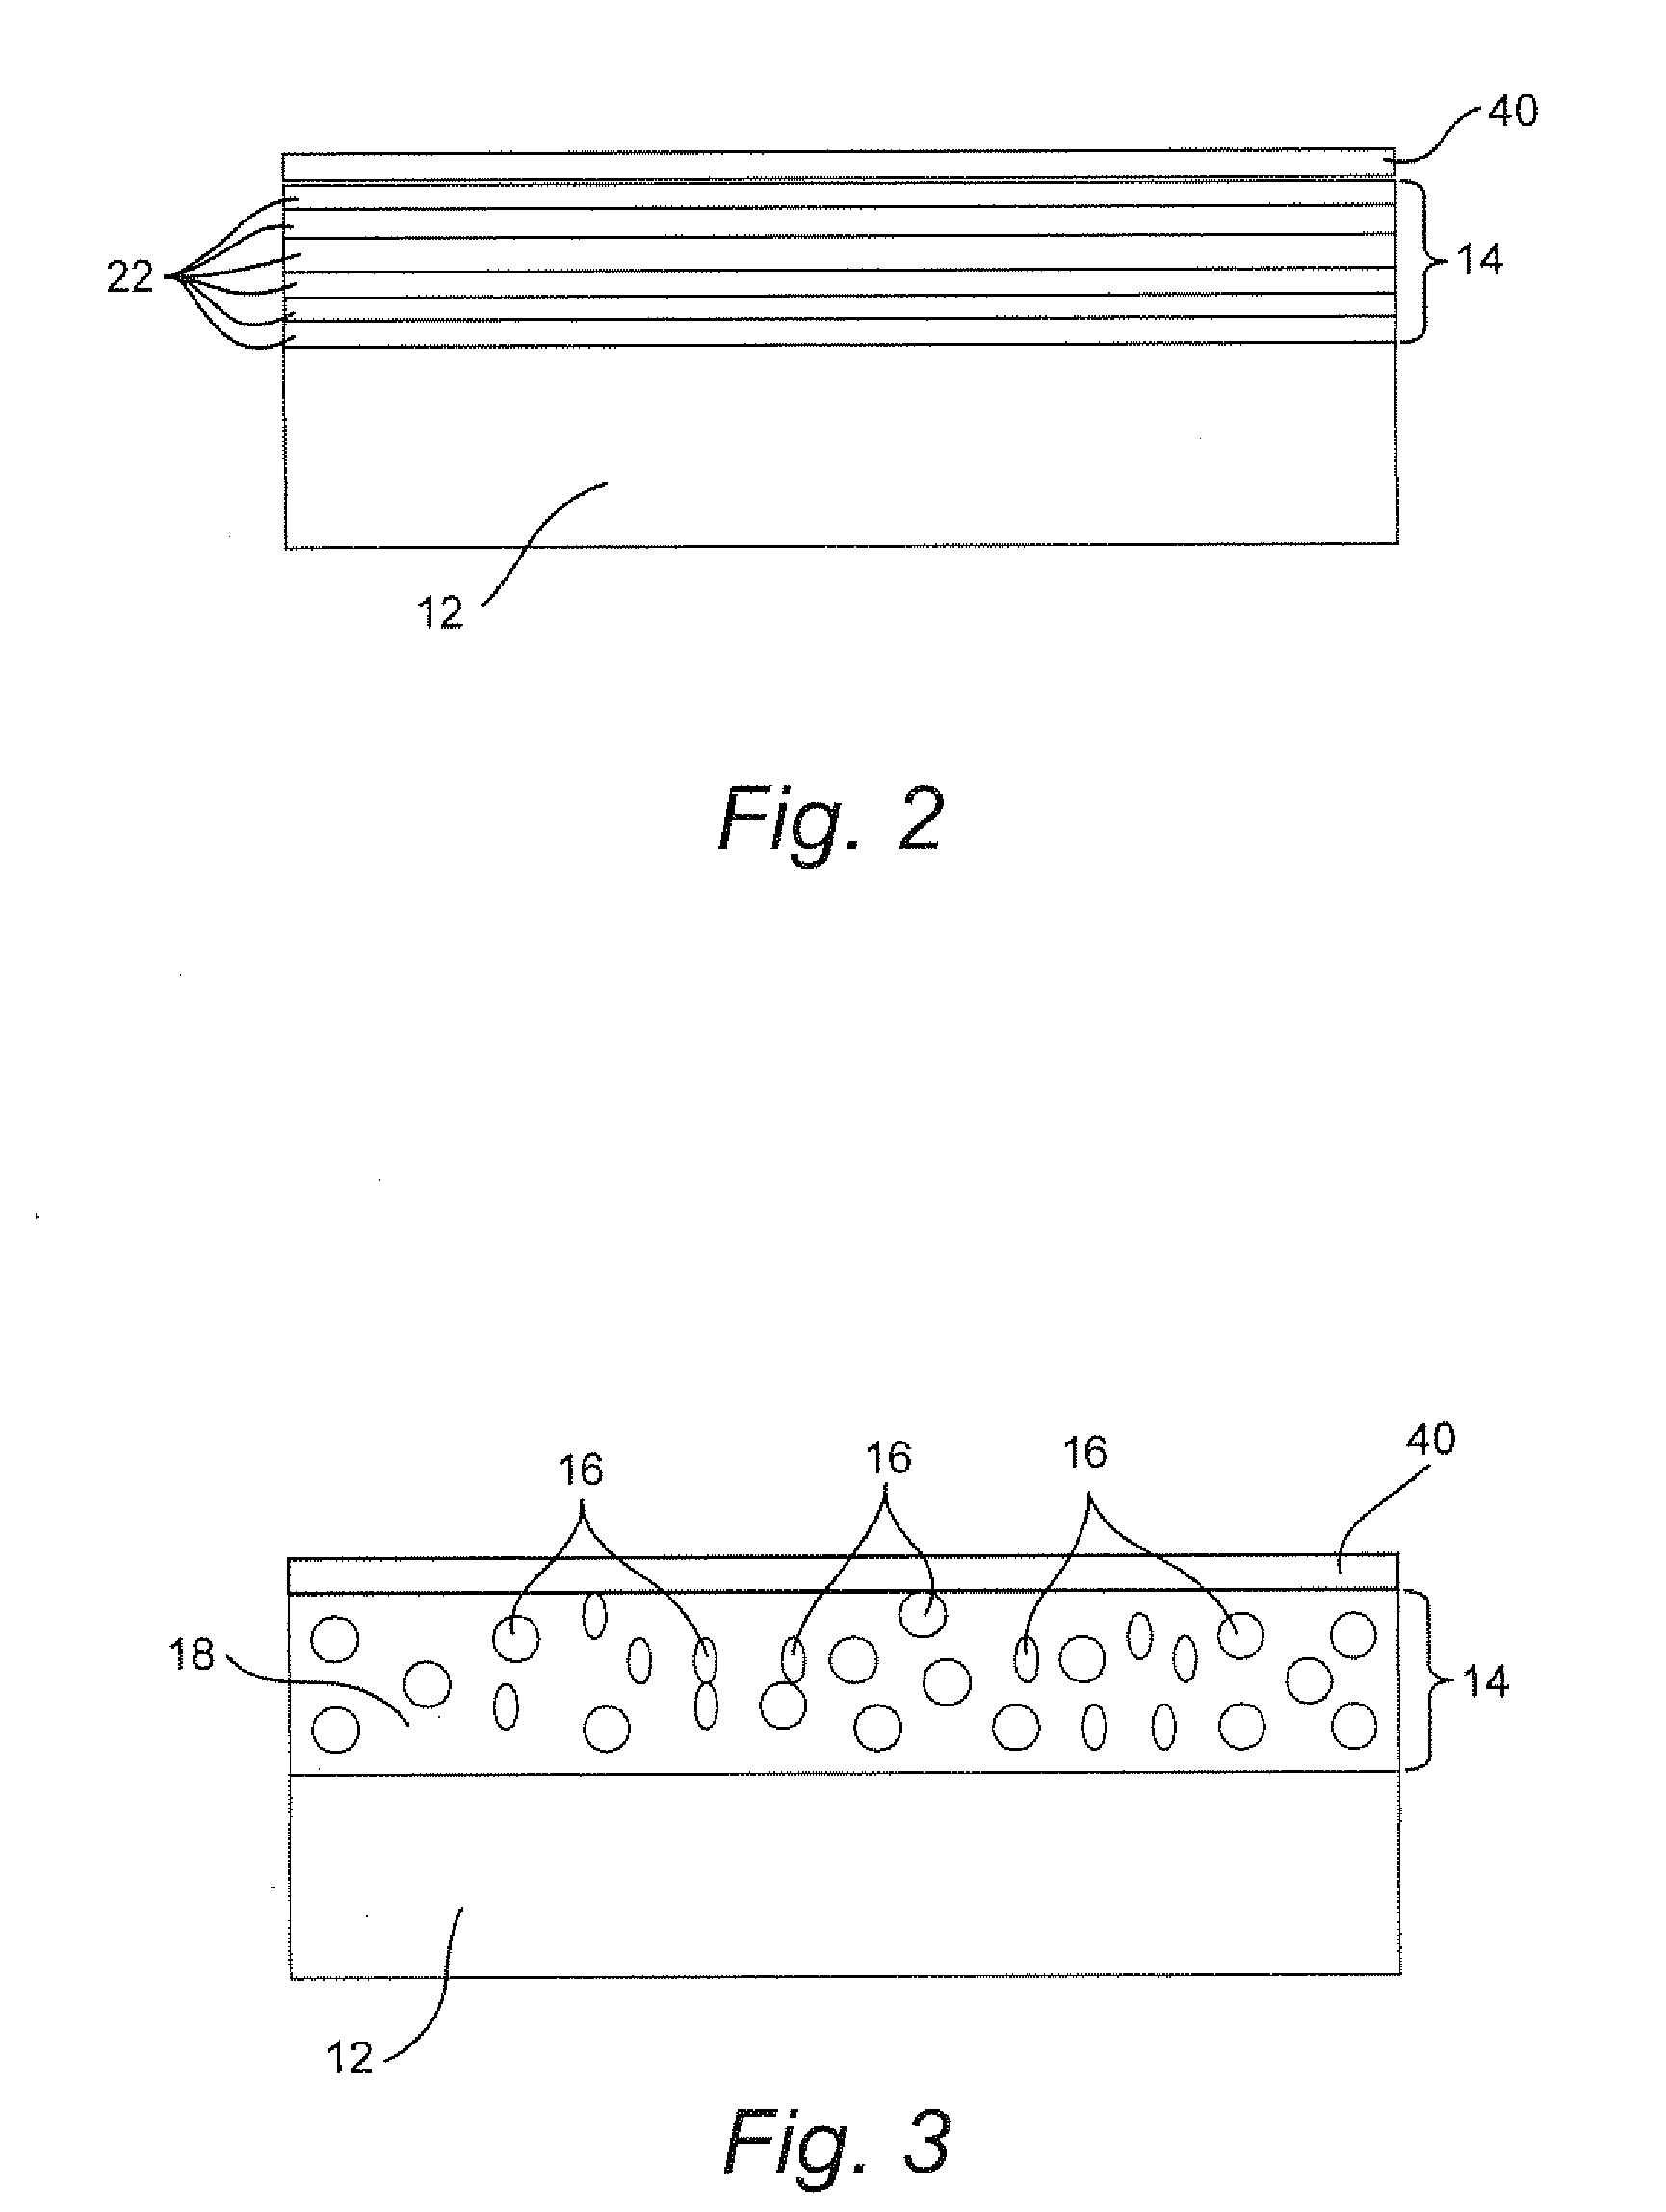 Vibration damping novel surface structures and methods of making the same